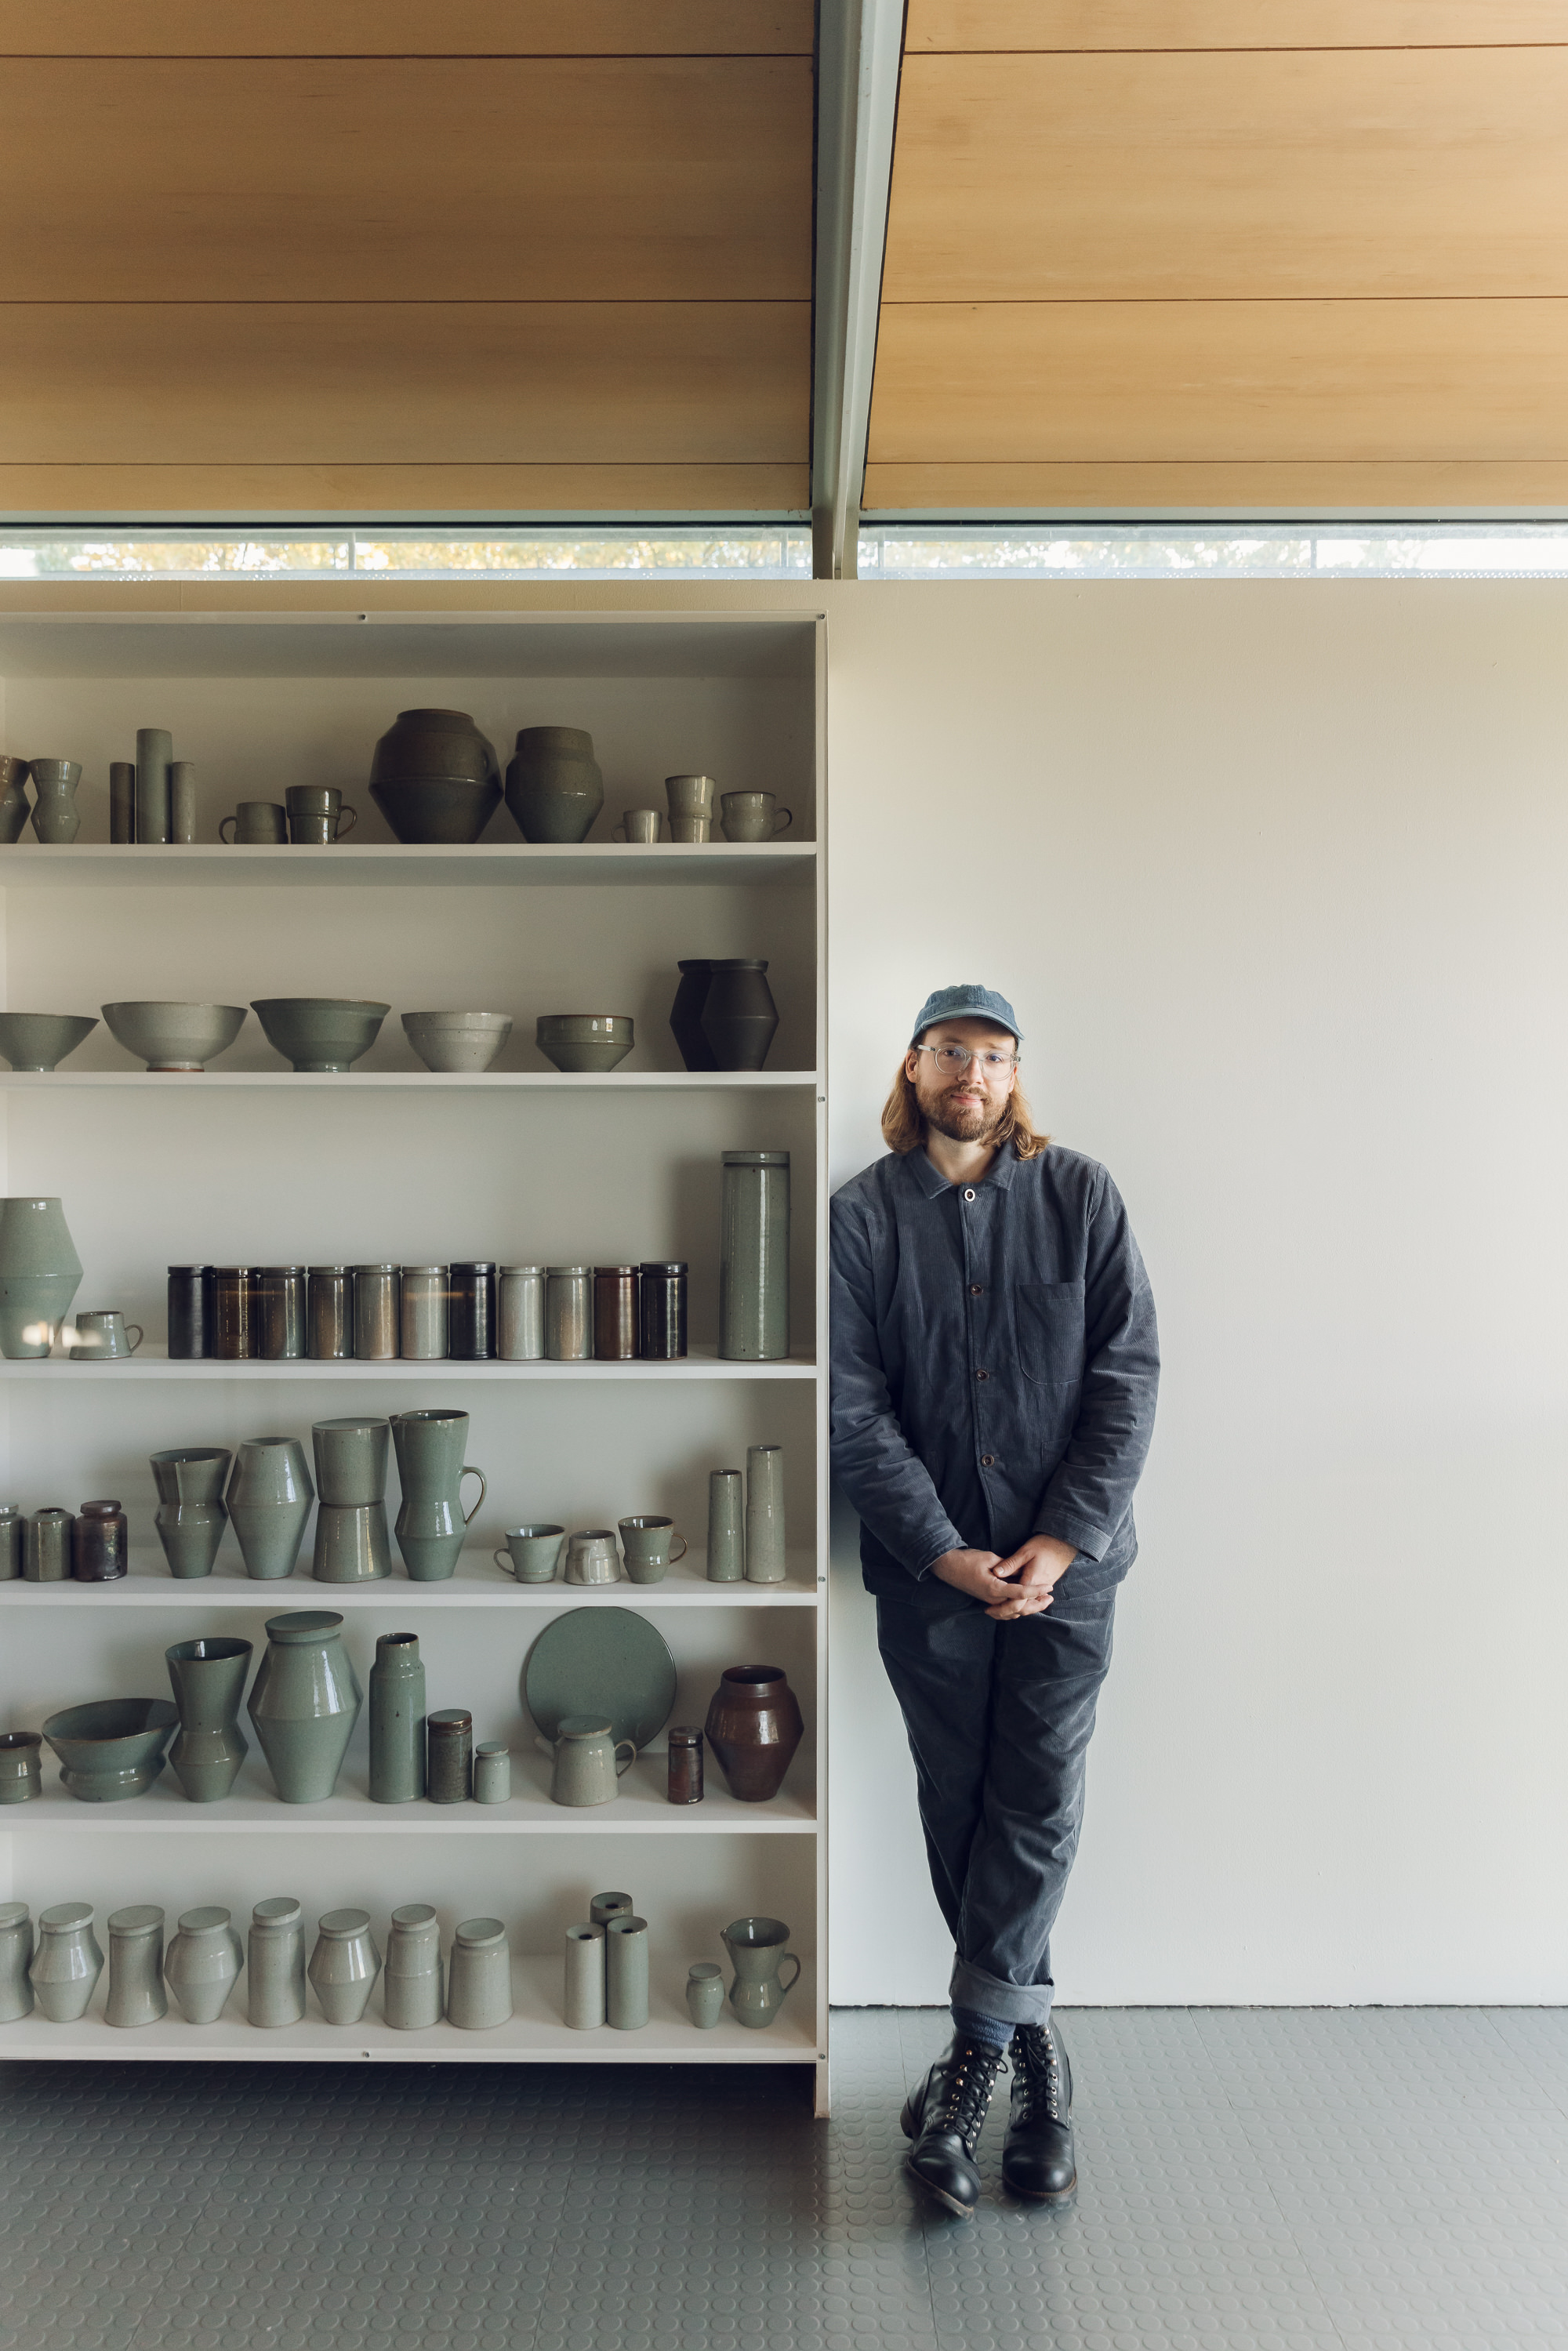 Man with shoulder length hair, glasses and a cap, leaning on shelves stacked with ceramic vessels.